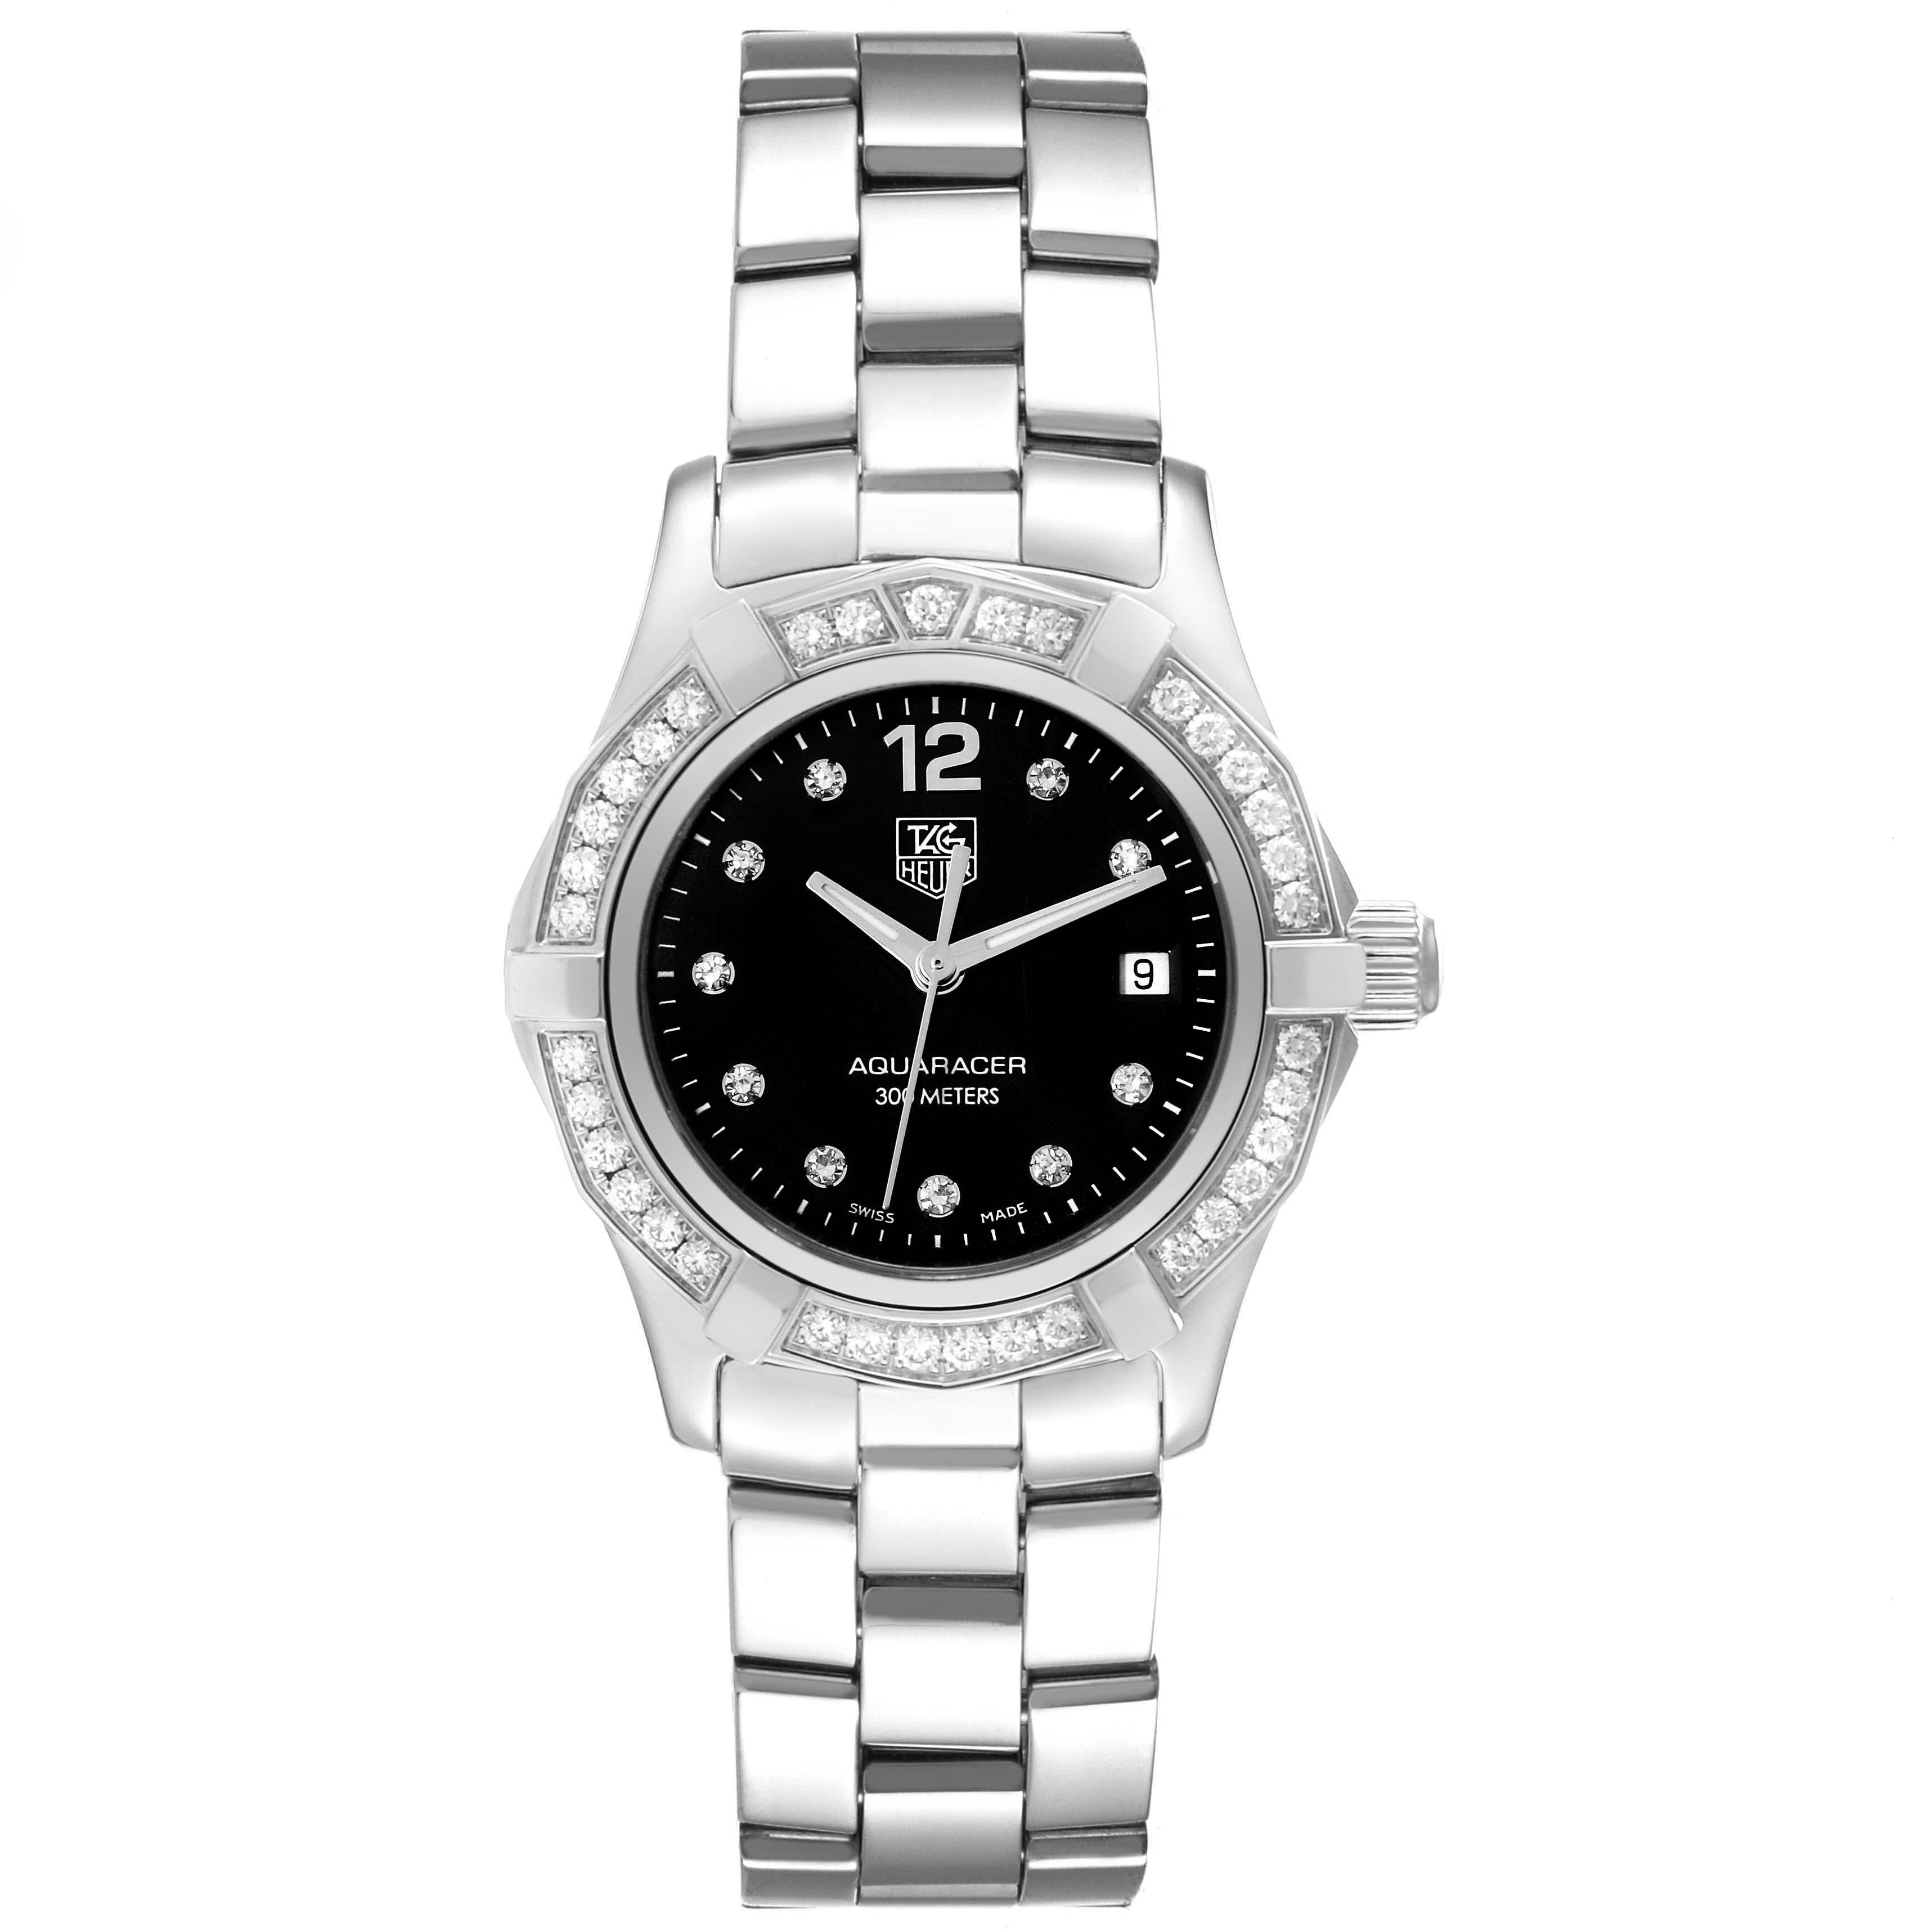 TAG Heuer Aquaracer Black Dial Diamond Steel Ladies Watch WAF141D Box Card. Quartz movement. Stainless steel case 27.0 mm in diameter. Case thickness: 14.3 mm. Stainless steel unidirectional rotating original Tag Heuer factory diamond bezel. Scratch